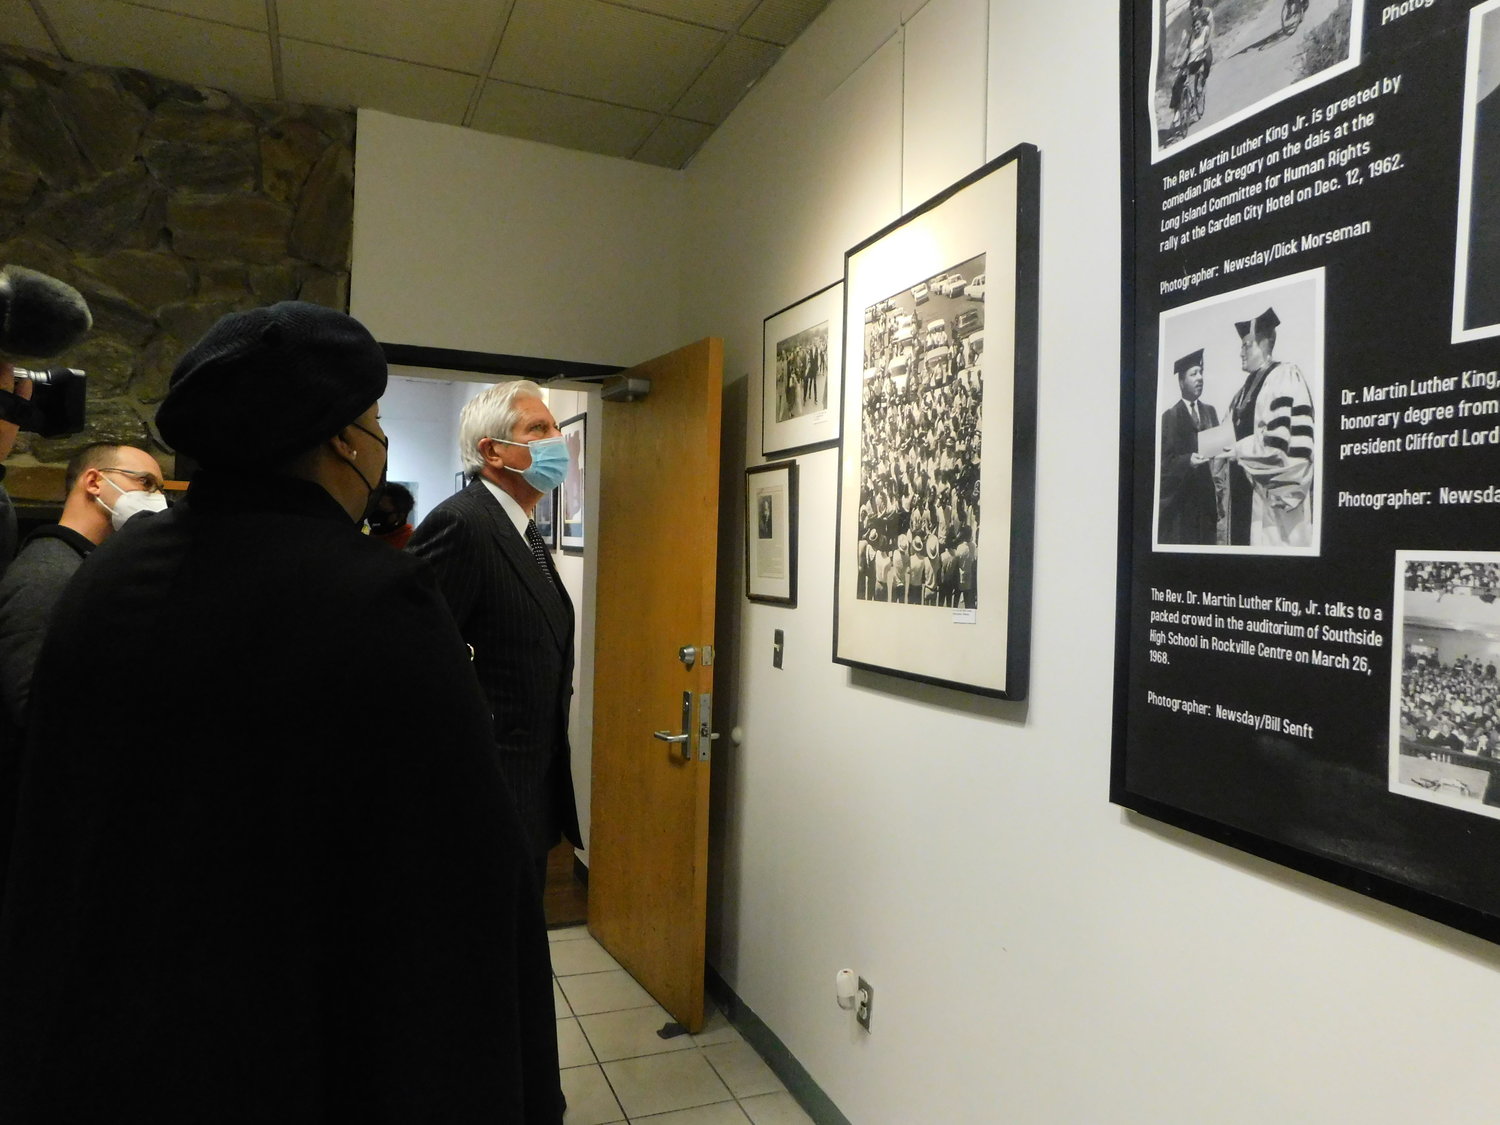 Nassau County Executive Bruce Blakeman examined a display about Martin Luther King Jr. at the Joysetta and Julius Pearse African American Museum of Nassau County prior to a commemorative program in the museum's auditorium ].